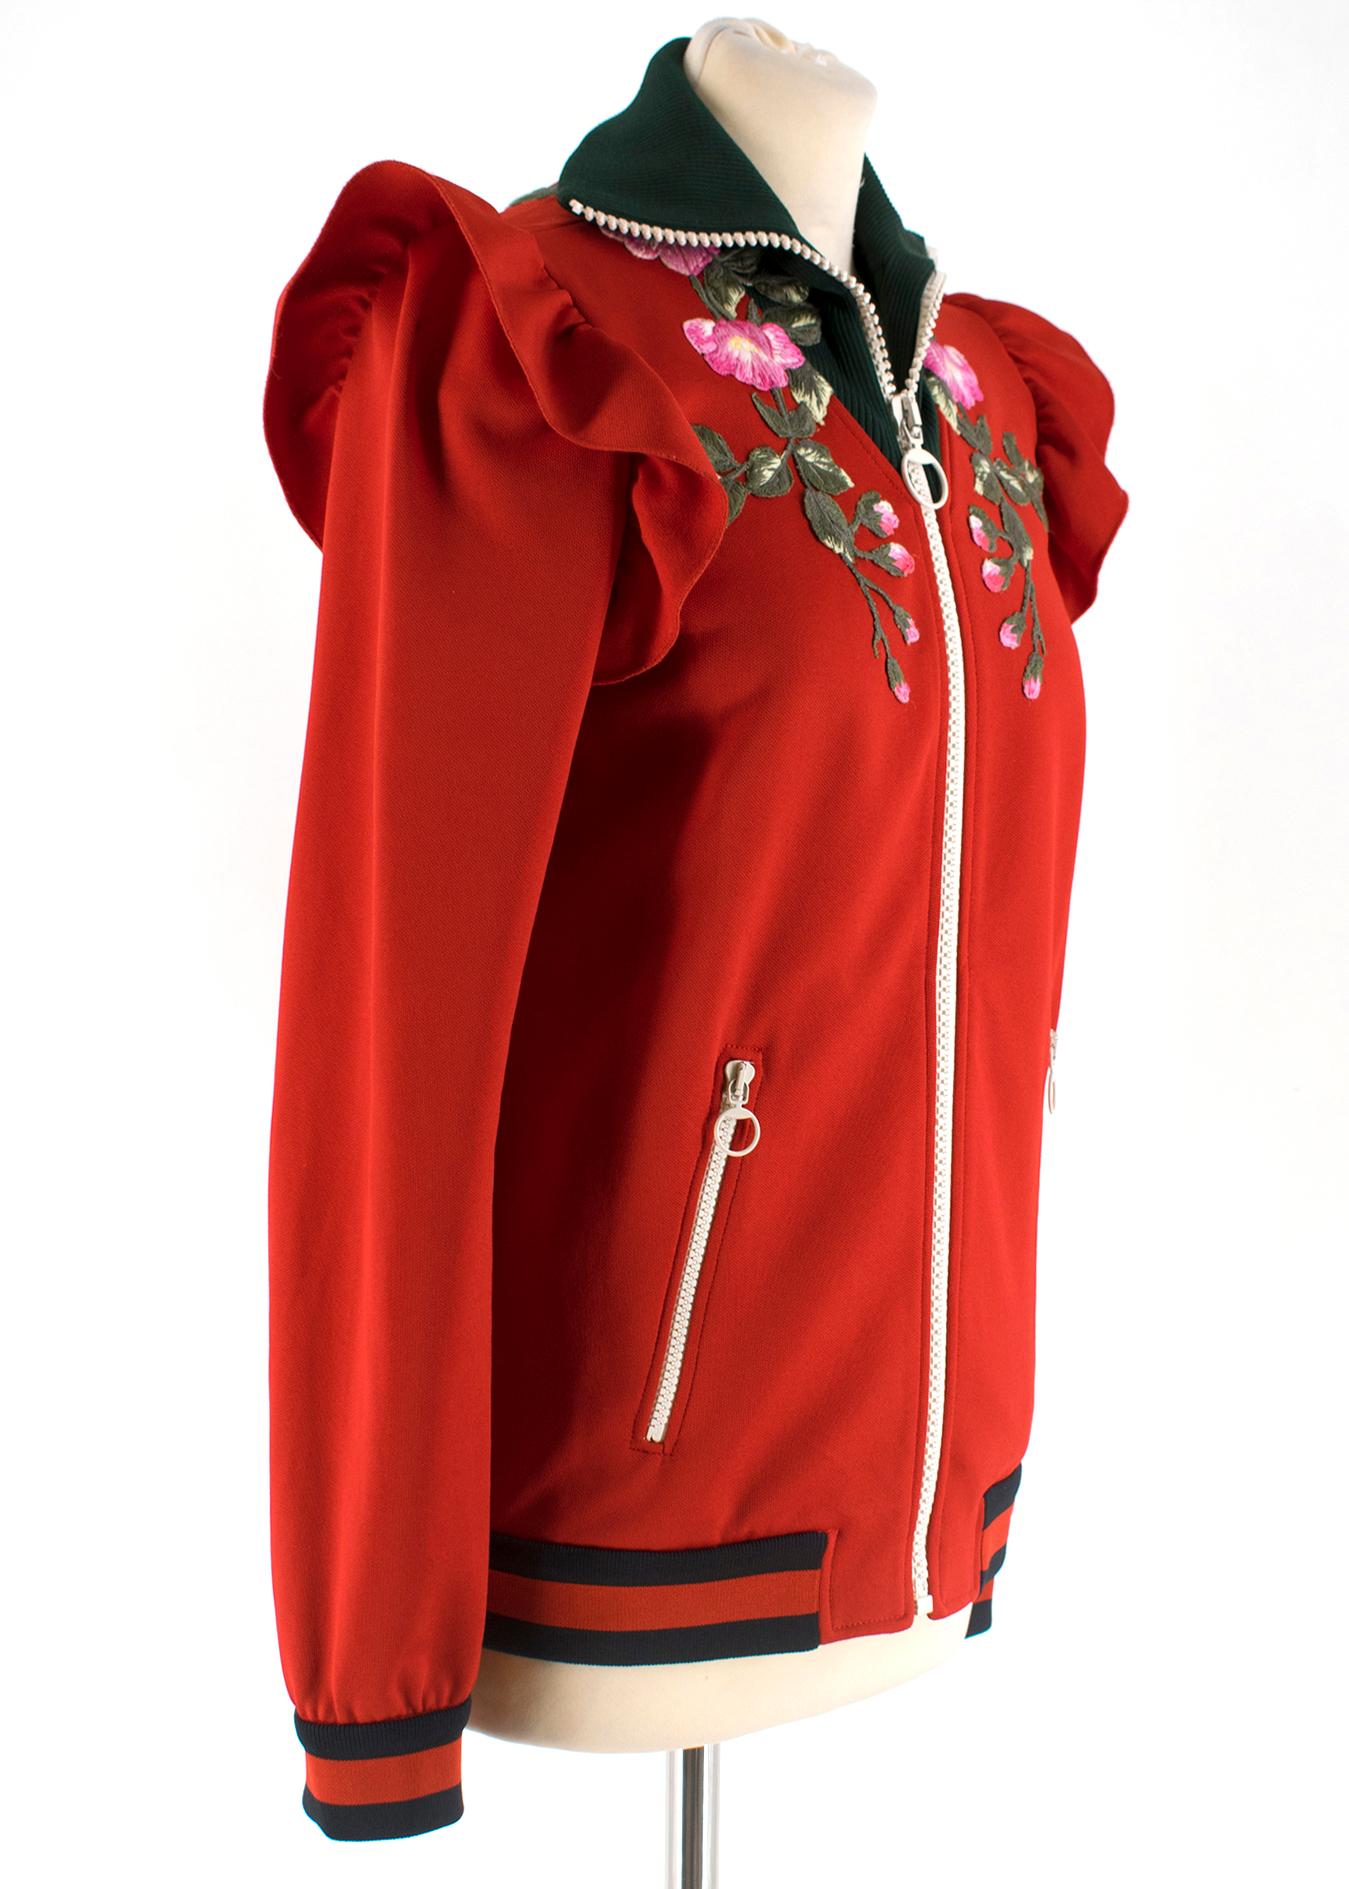 Gucci Red Embroidered Webstripe High Neck Tracksuit

High neck elastic collar
Embroidered rose detail on chest
Ruffled detail at shoulders
Elastic at wrist and waist
Thick, stretchy material
Striped detail on both pieces
Fitted trousers
Zippers at